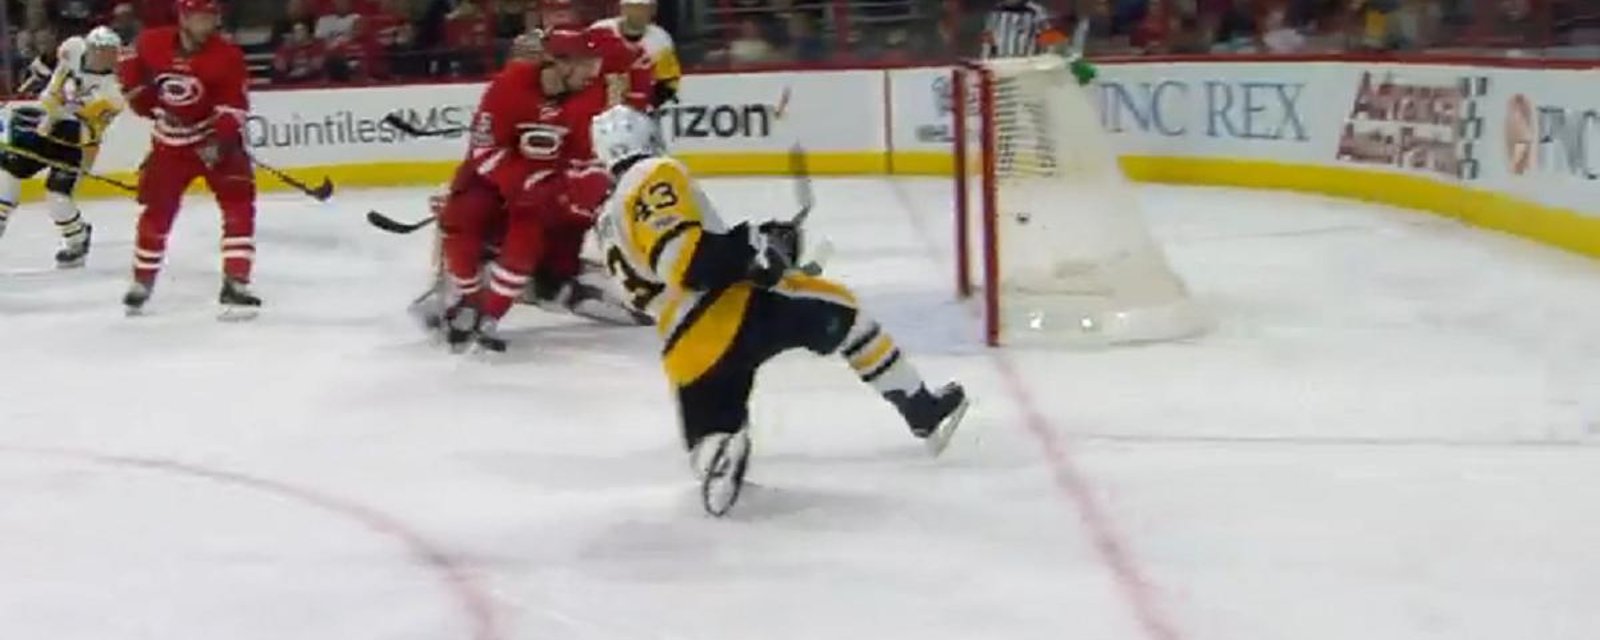 Crosby with sick no look behind the back assist